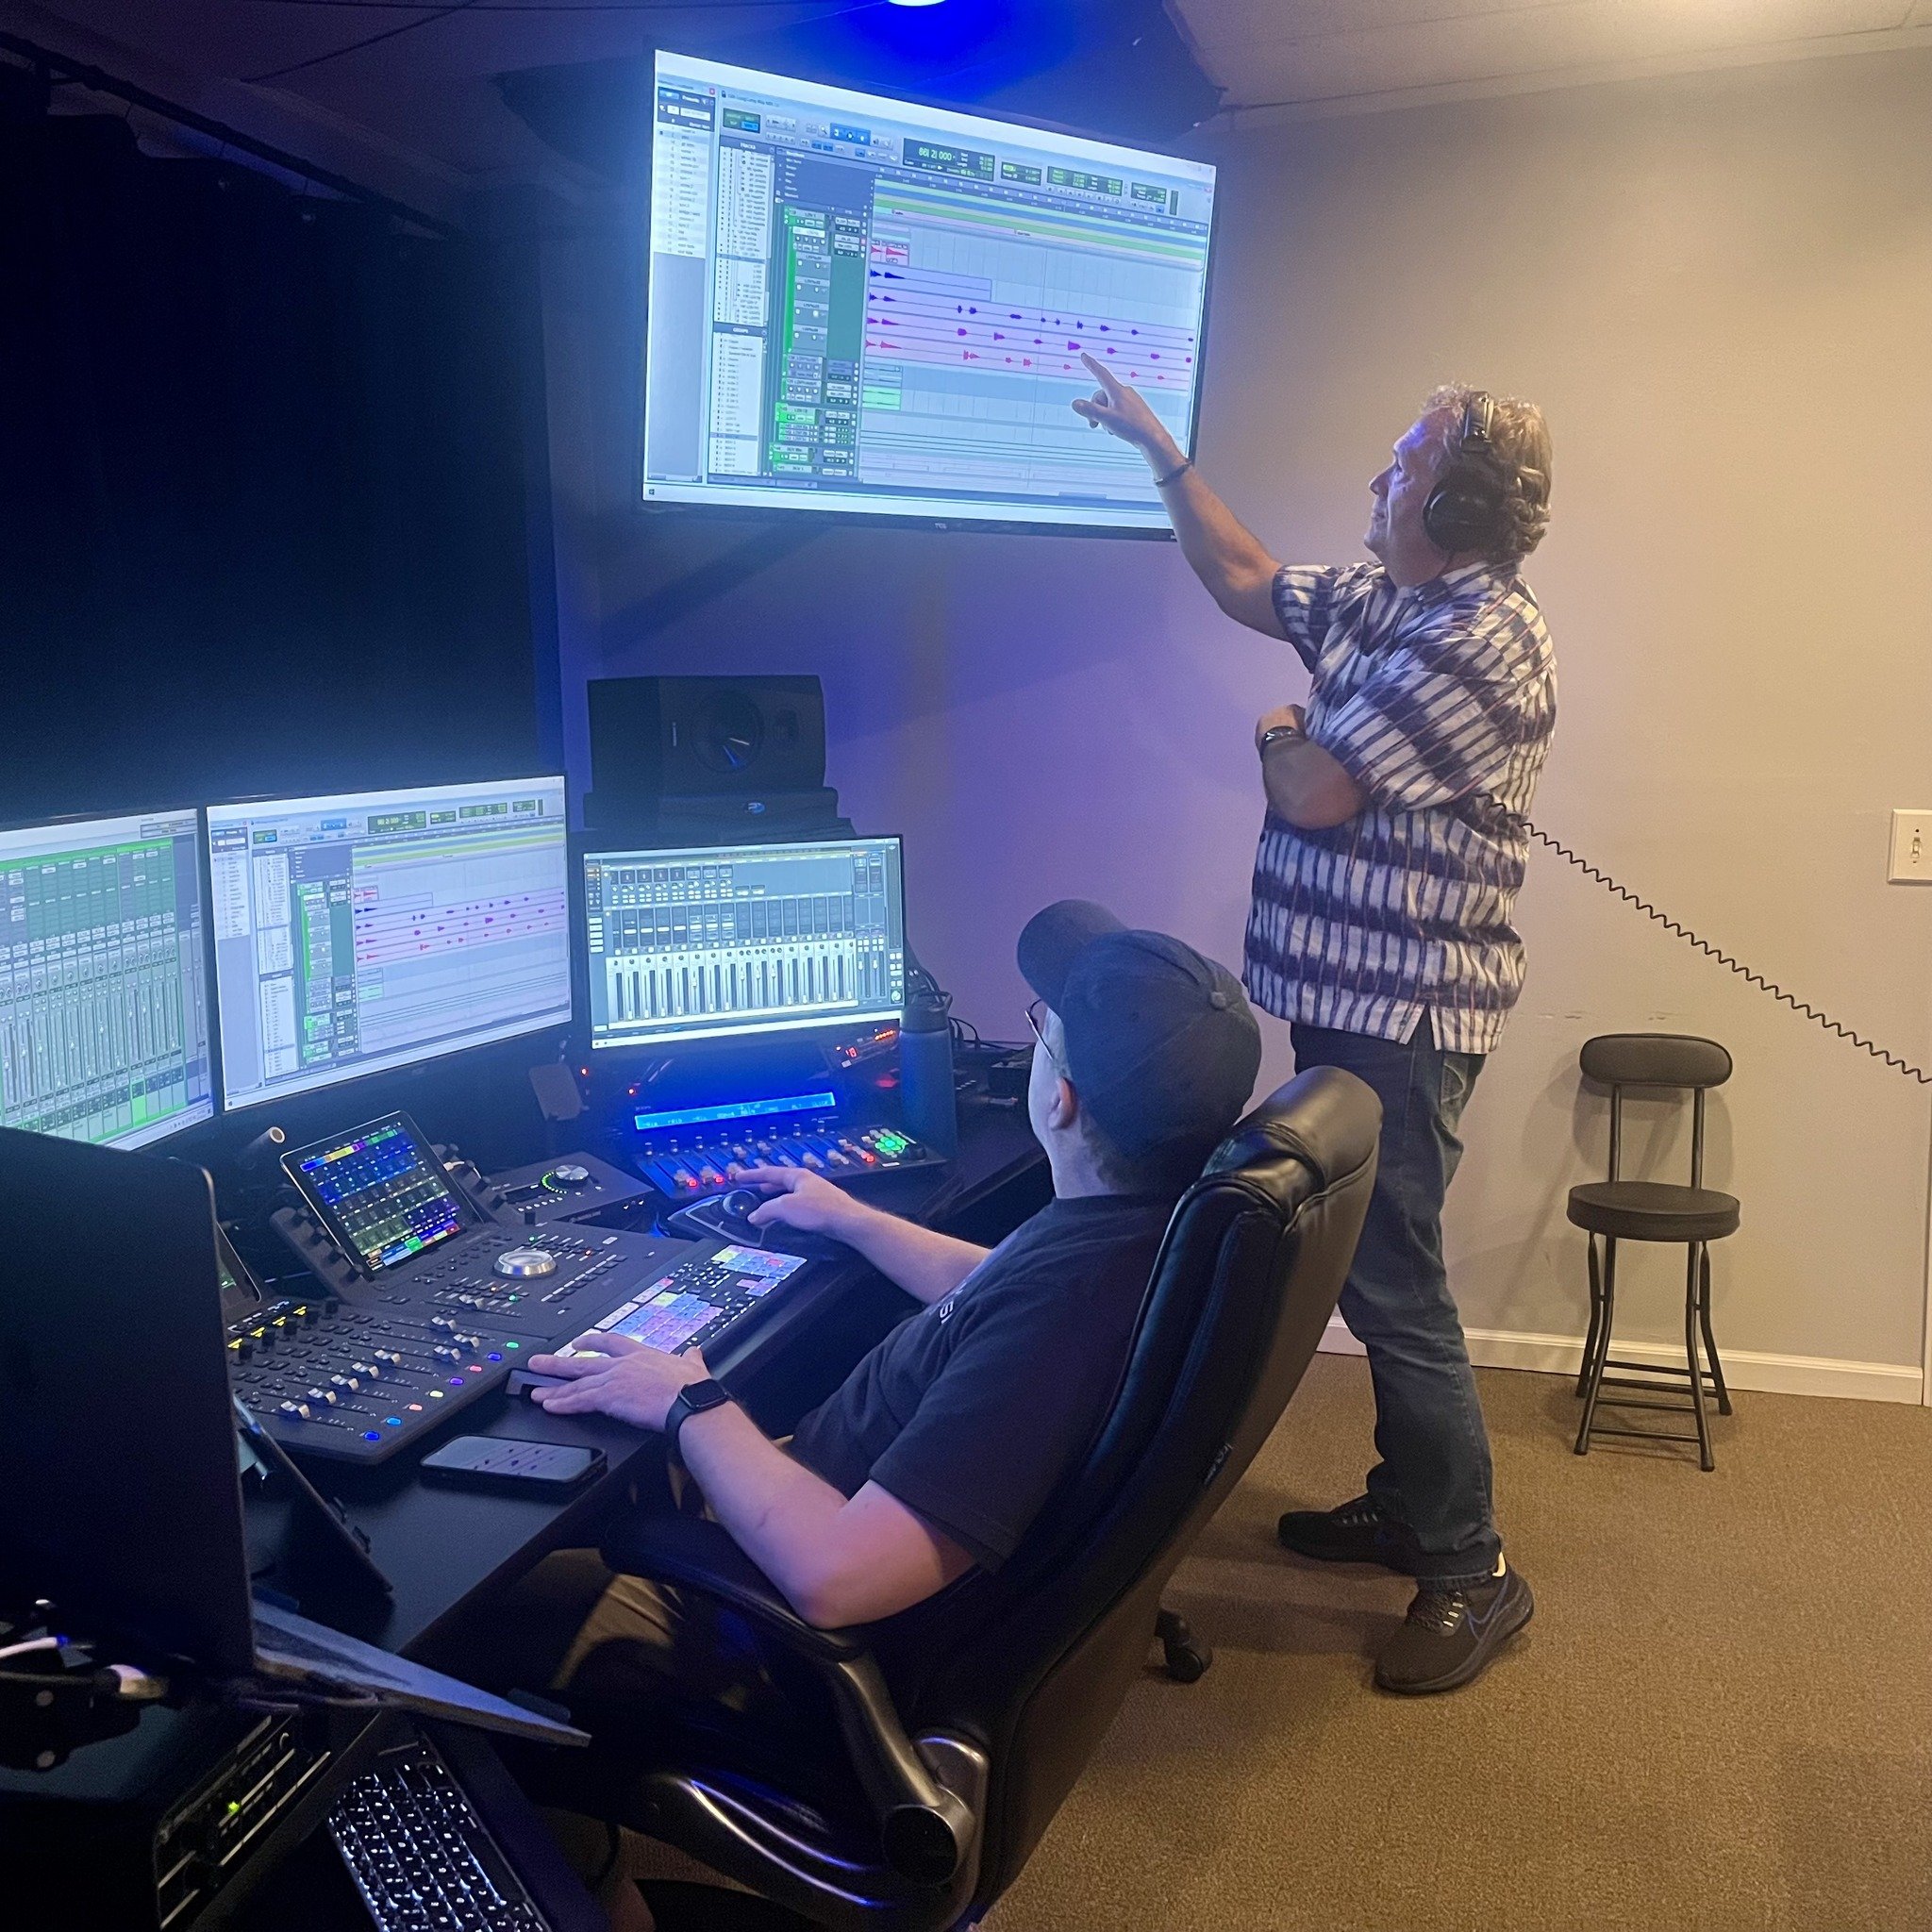 Adding some final touches to a couple of @glen.wagner.1612's songs!

Reach out to book a session or learn more&mdash;link in bio &gt;&gt;
.
.
.
#hiddencreekmusic #musicproducer #musicproduction #musicstudio #recordingstudio #recordingstudio #bellevue